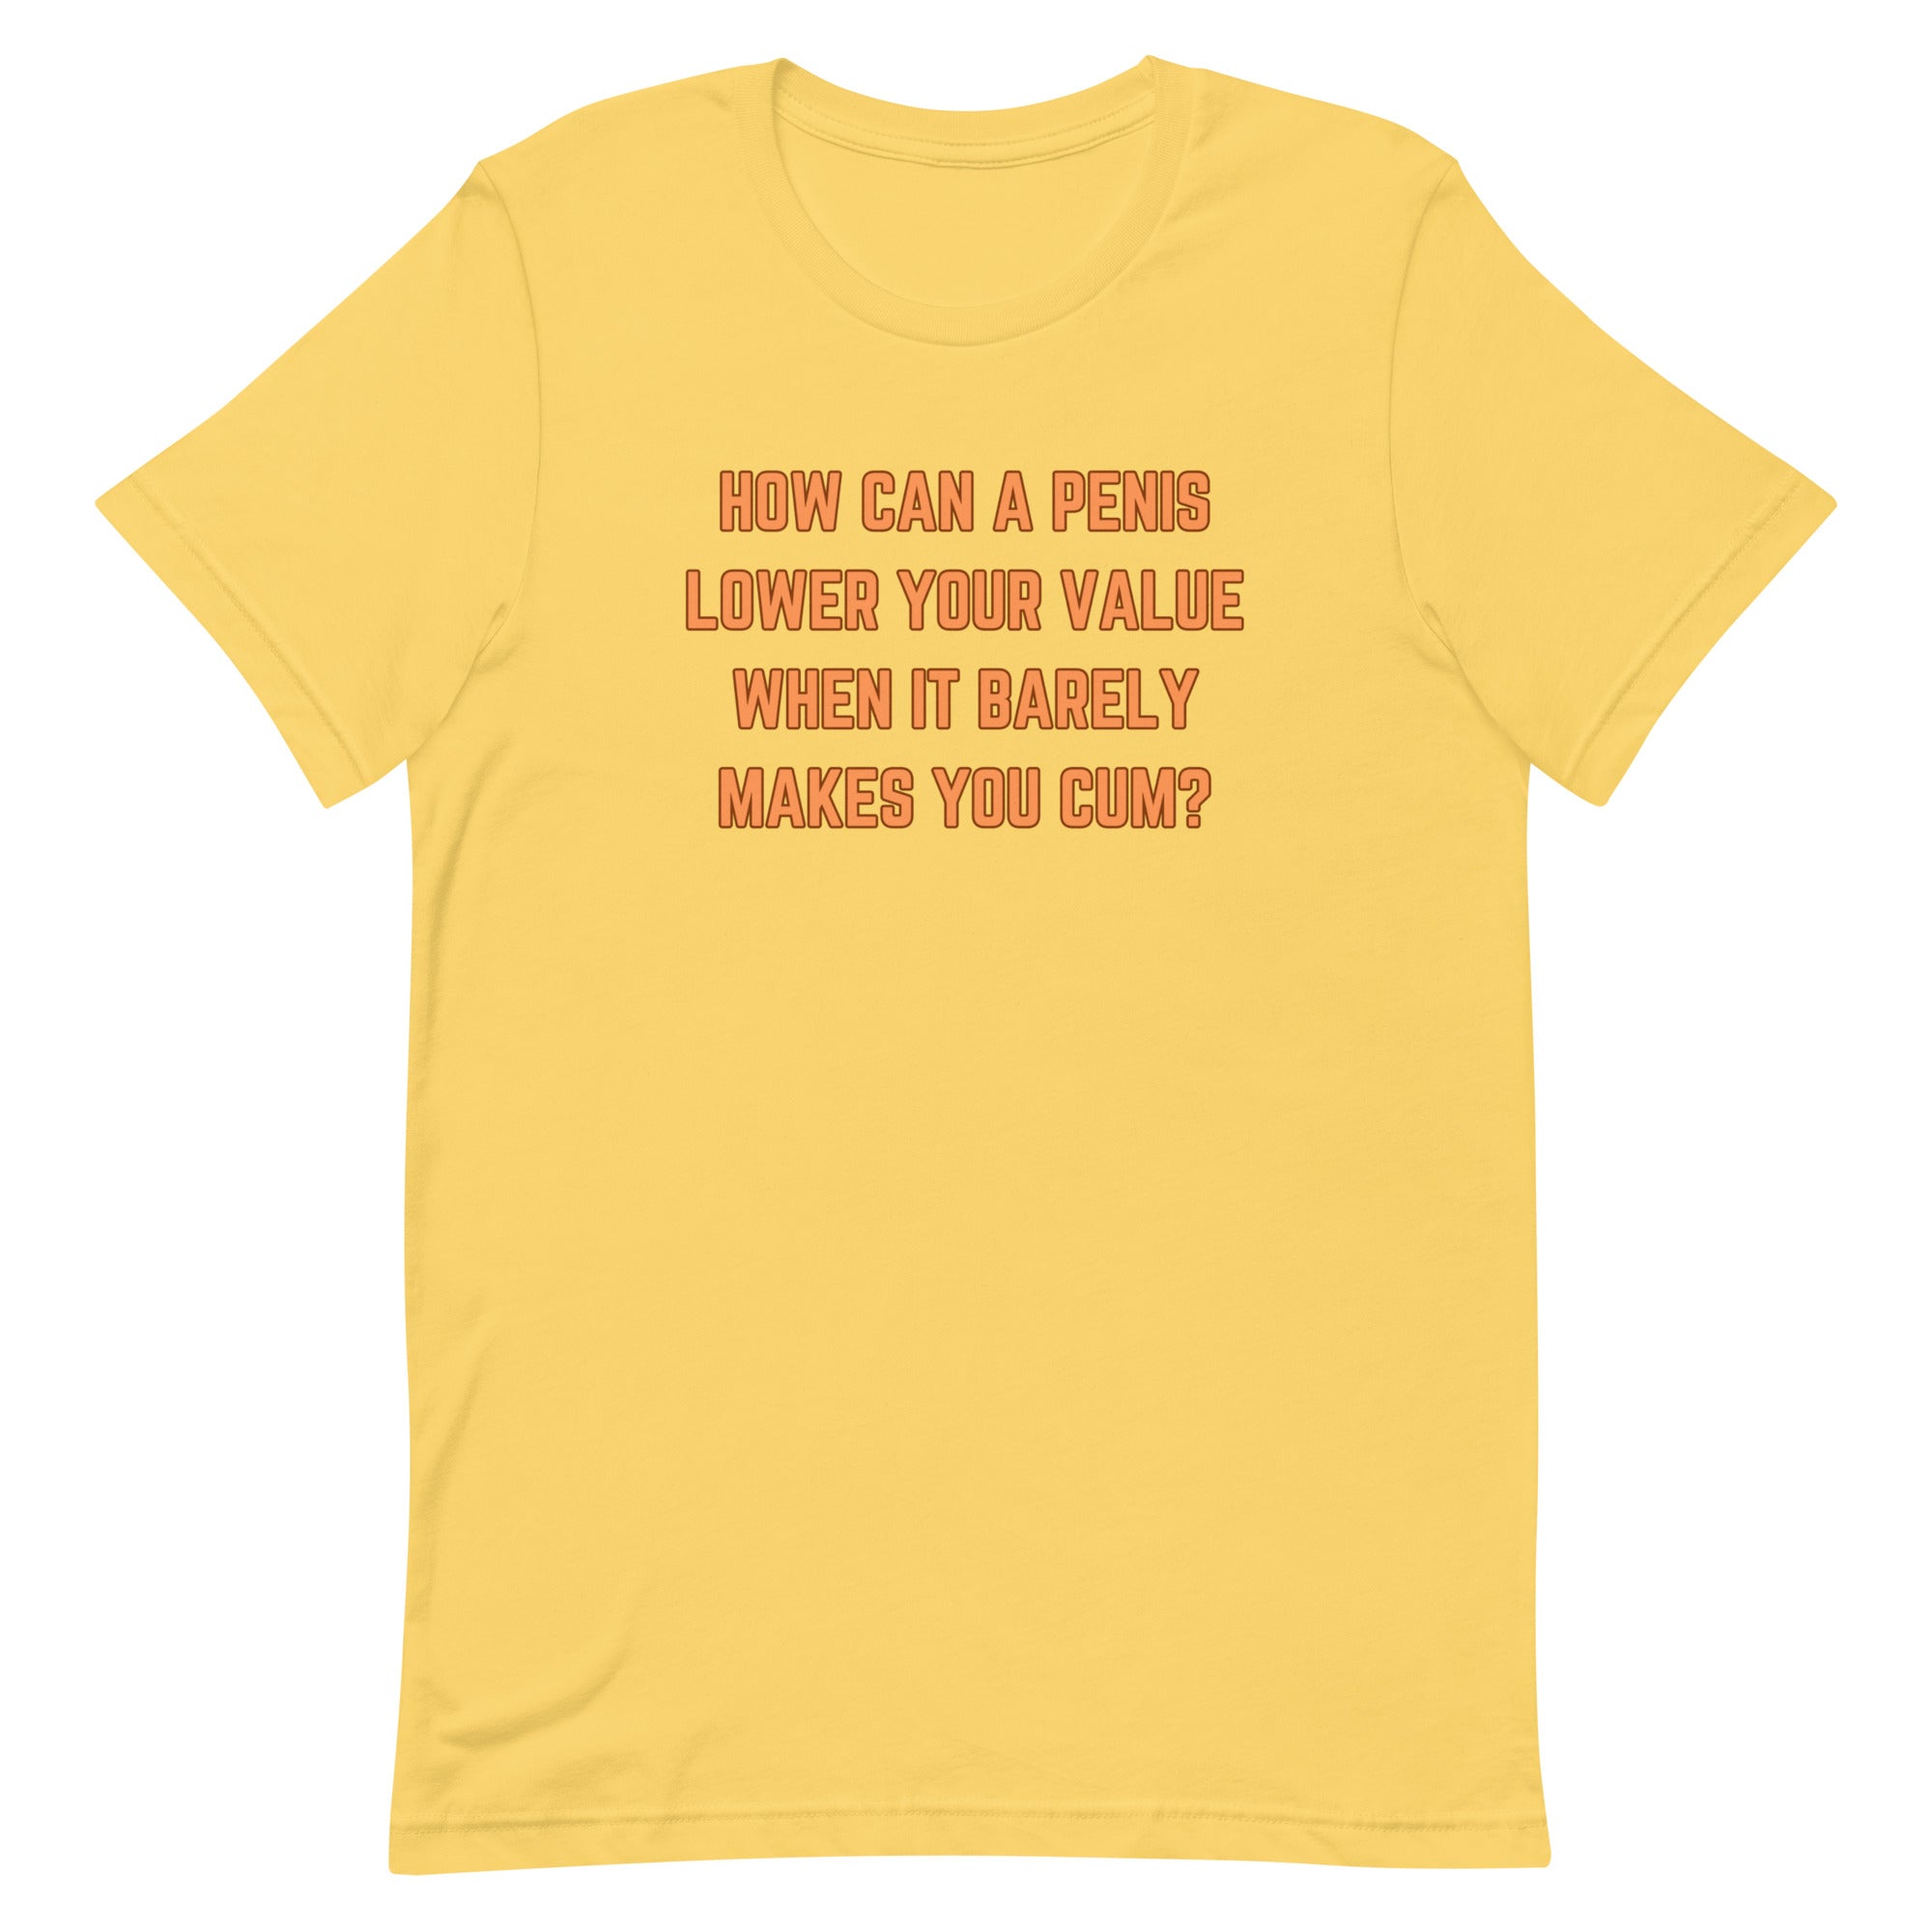 How Can A Penis Unisex Feminist t-shirt - Shop Women’s Rights T-shirts - Feminist Trash Store - Yellow